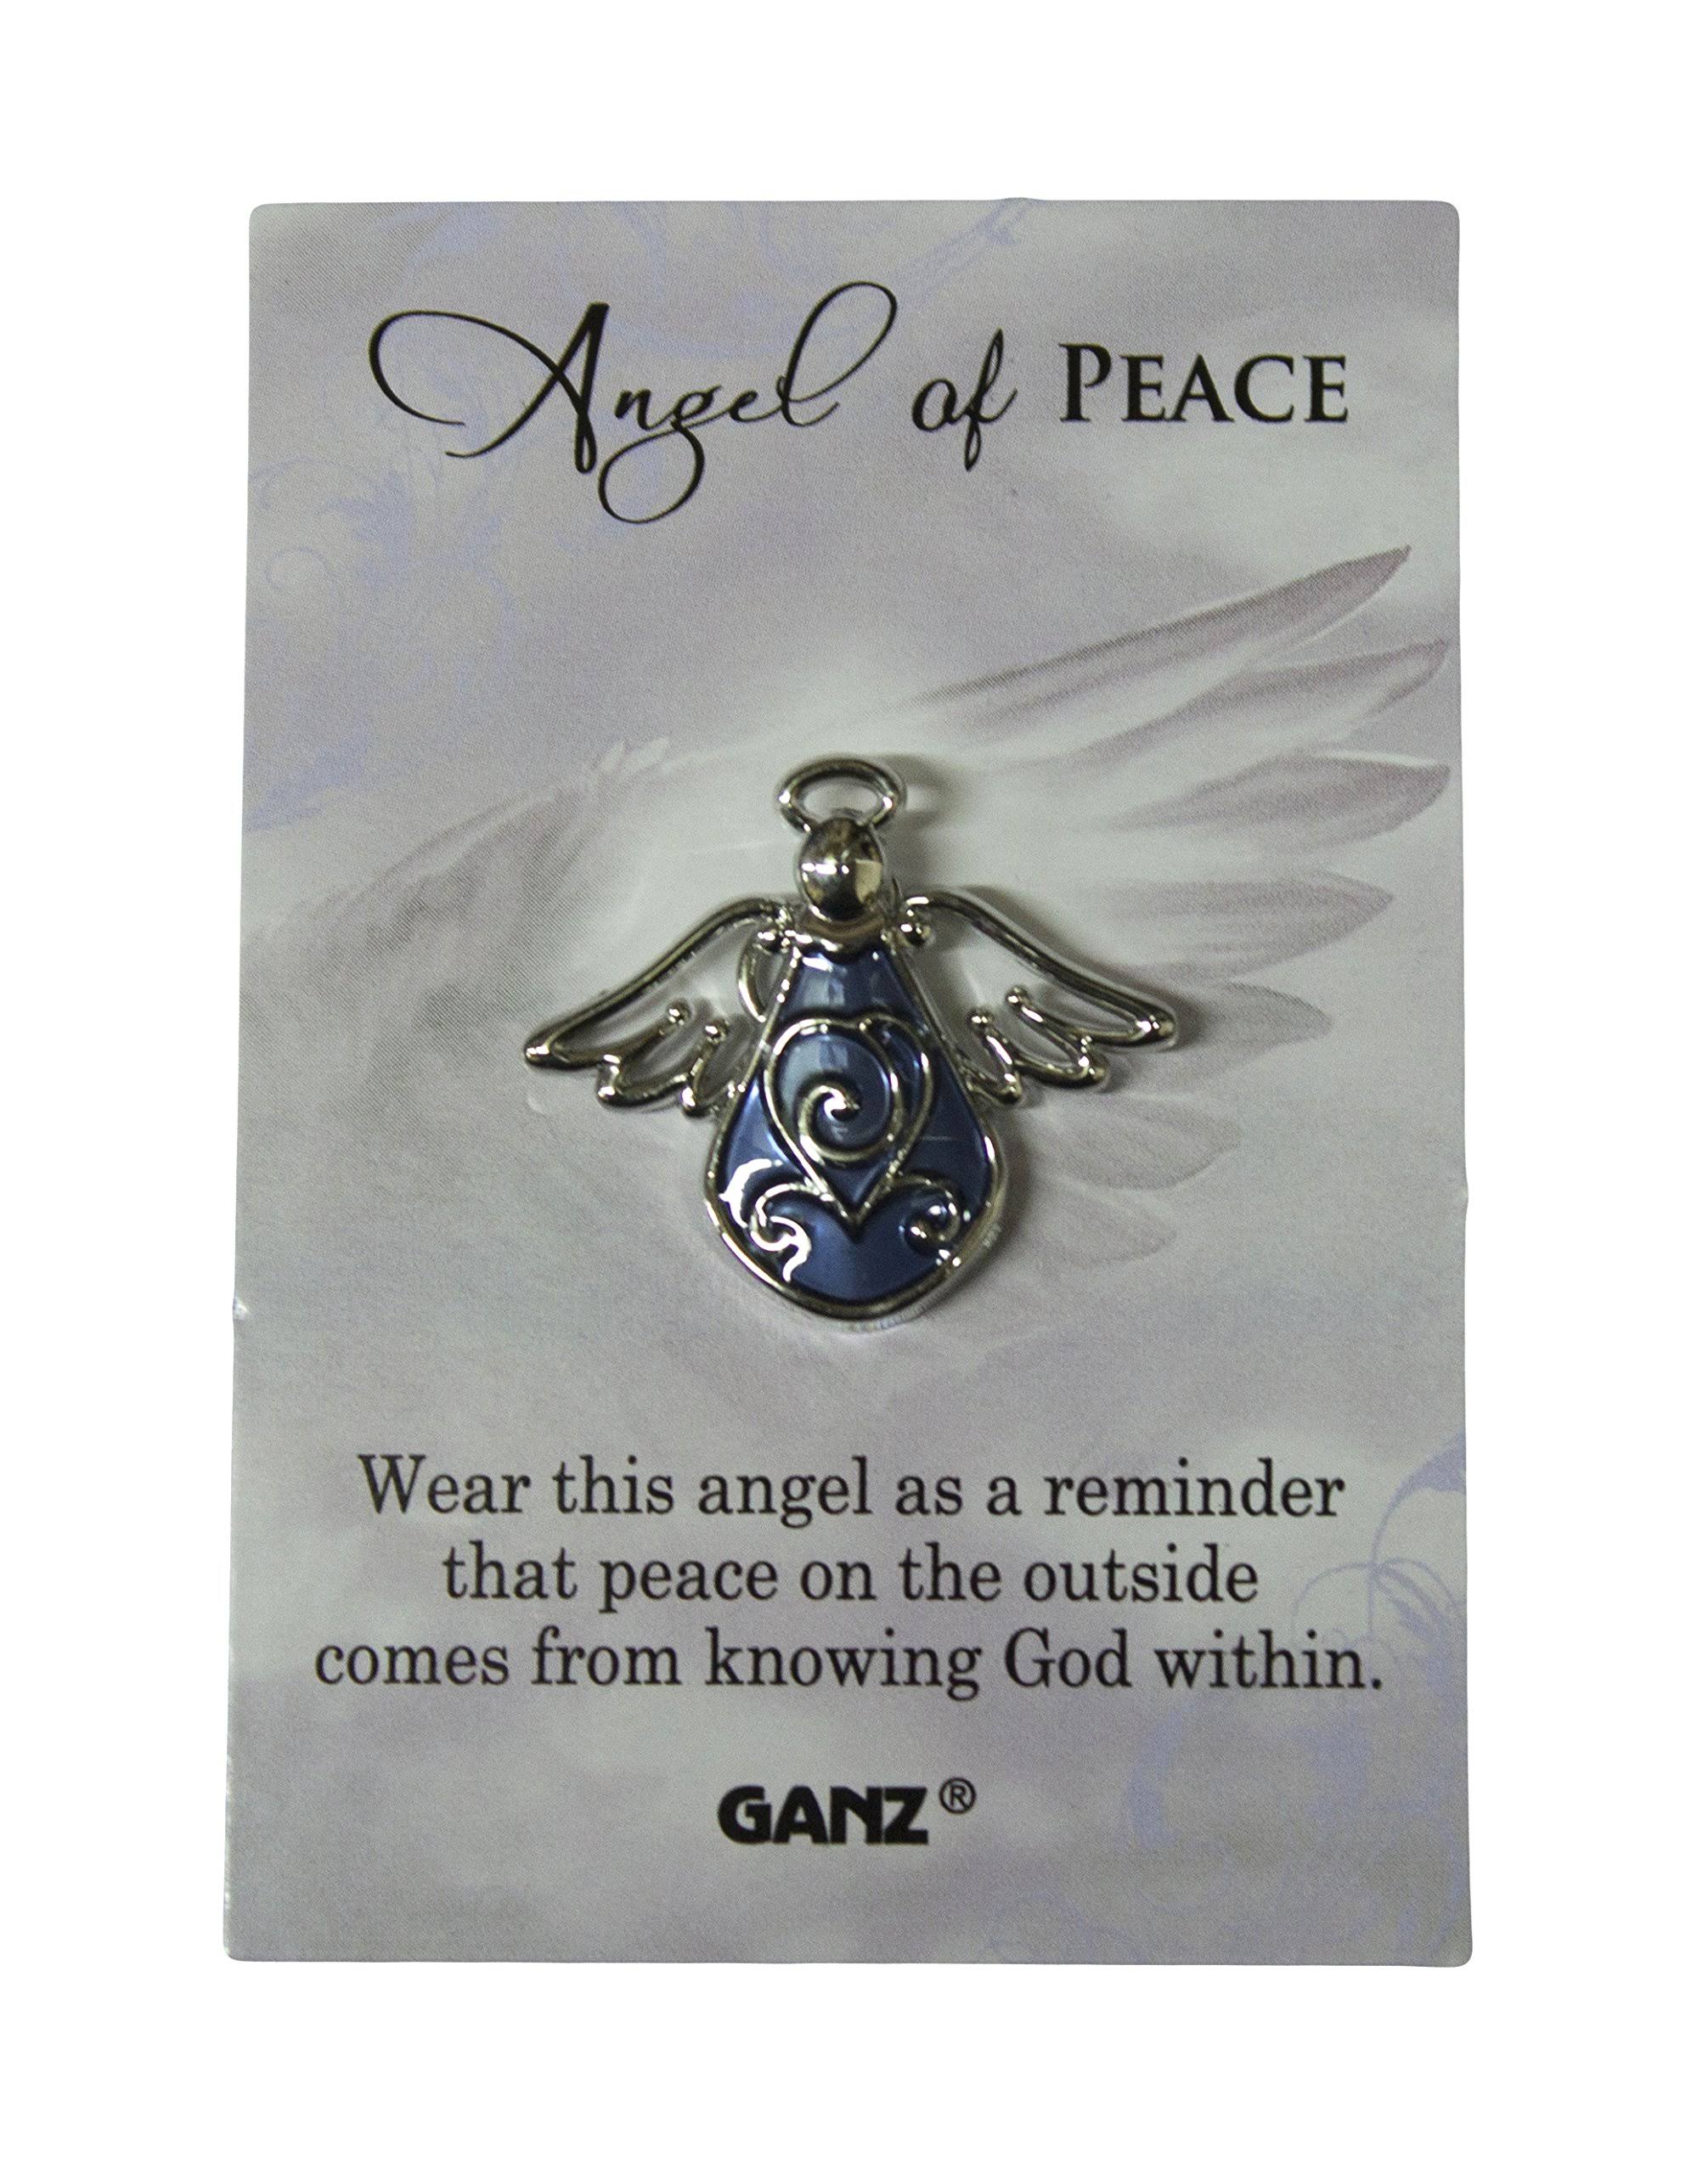 Ganz Pin - Angel of Peace Wear This Angel As A Reminder That Peace On